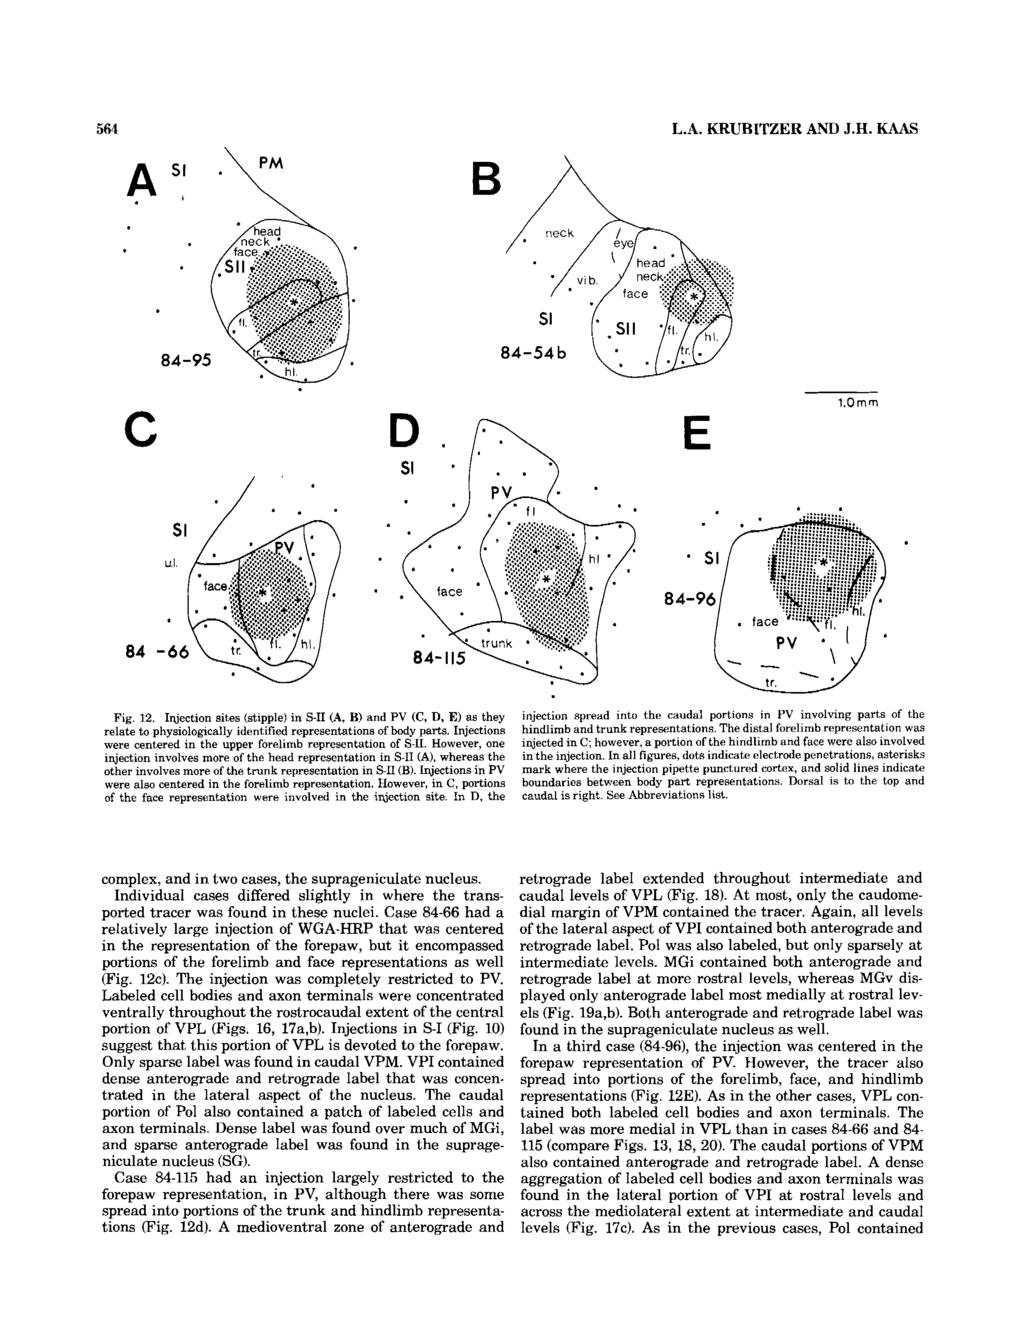 564 L.A. KRUBITZER AND J.H. KAAS C E l.ornm Fig. 12. Injection sites (stipple) in S-I1 (A, 5) and PV (C, D, E) as they relate to physiologically identified representations of body parts.